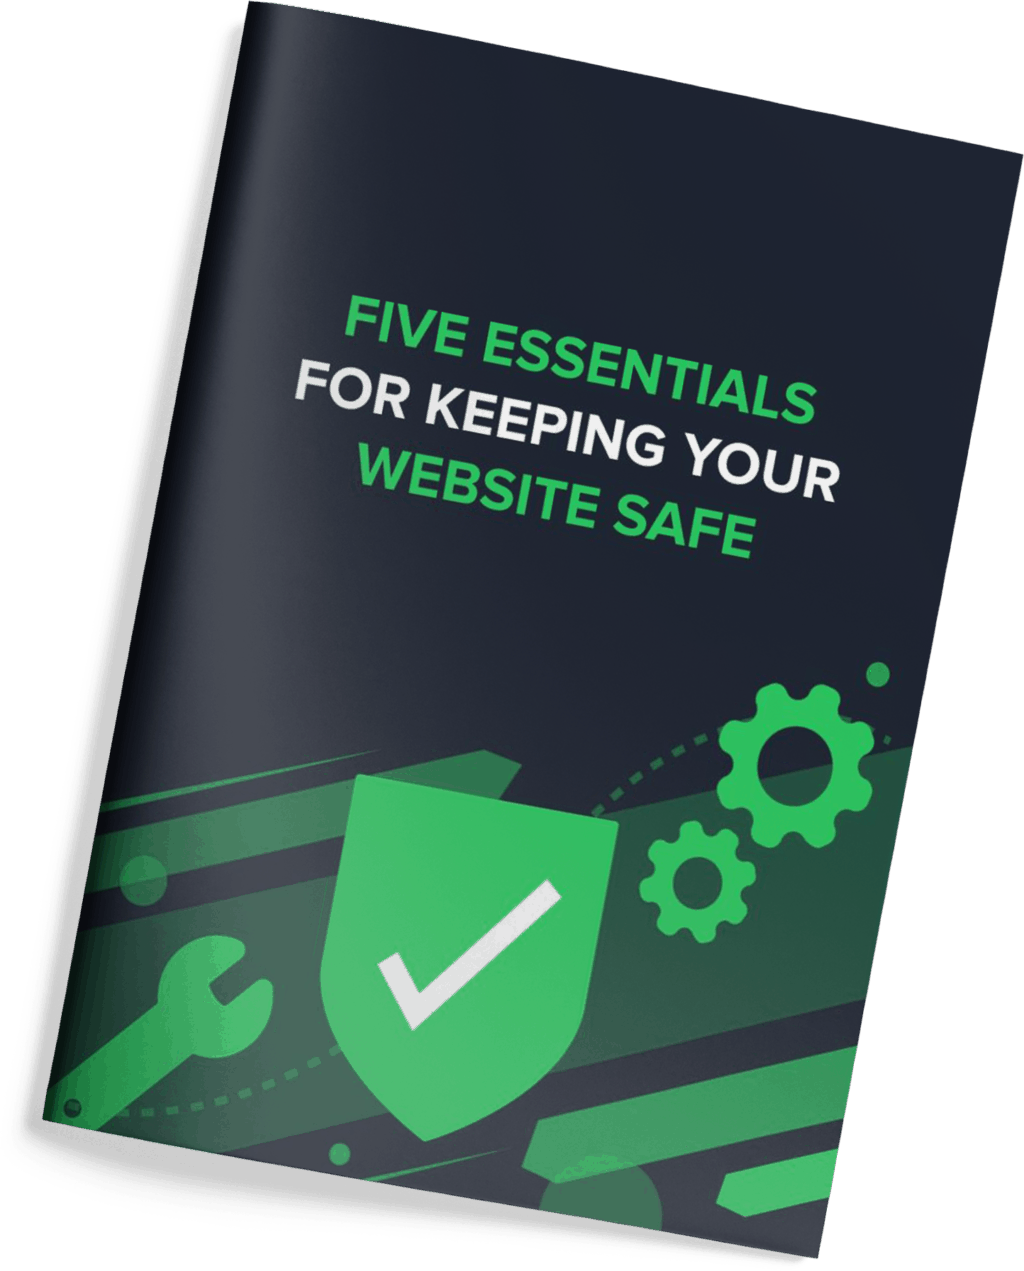 5 essentials for keeping your website safe cover